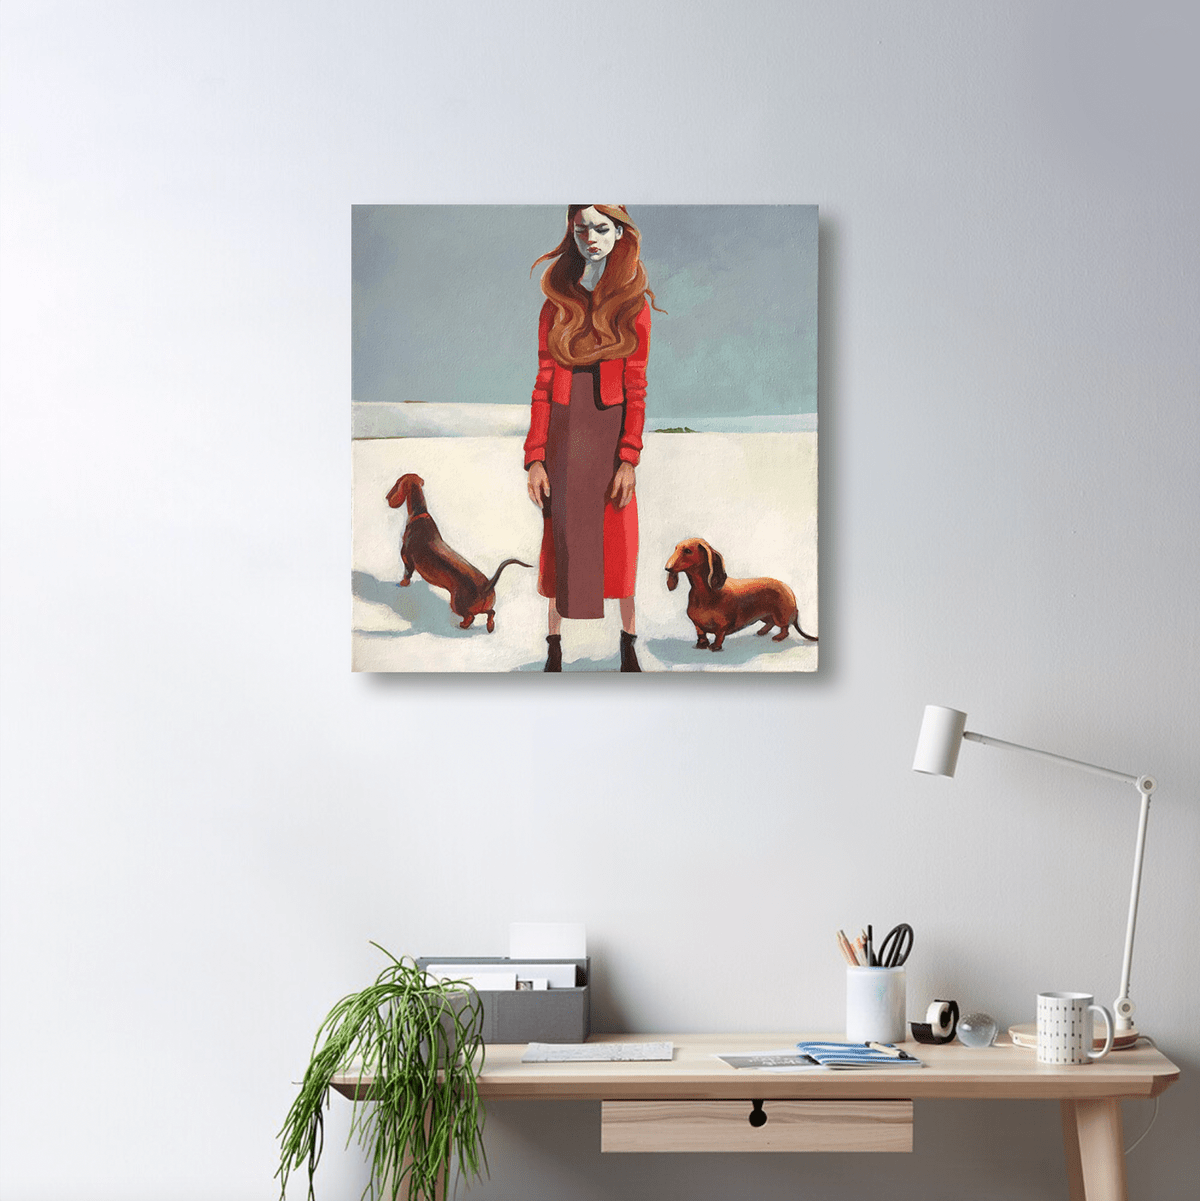 annoyance contemporary art Contemporary Landscape dachshund long hair winter woman in red